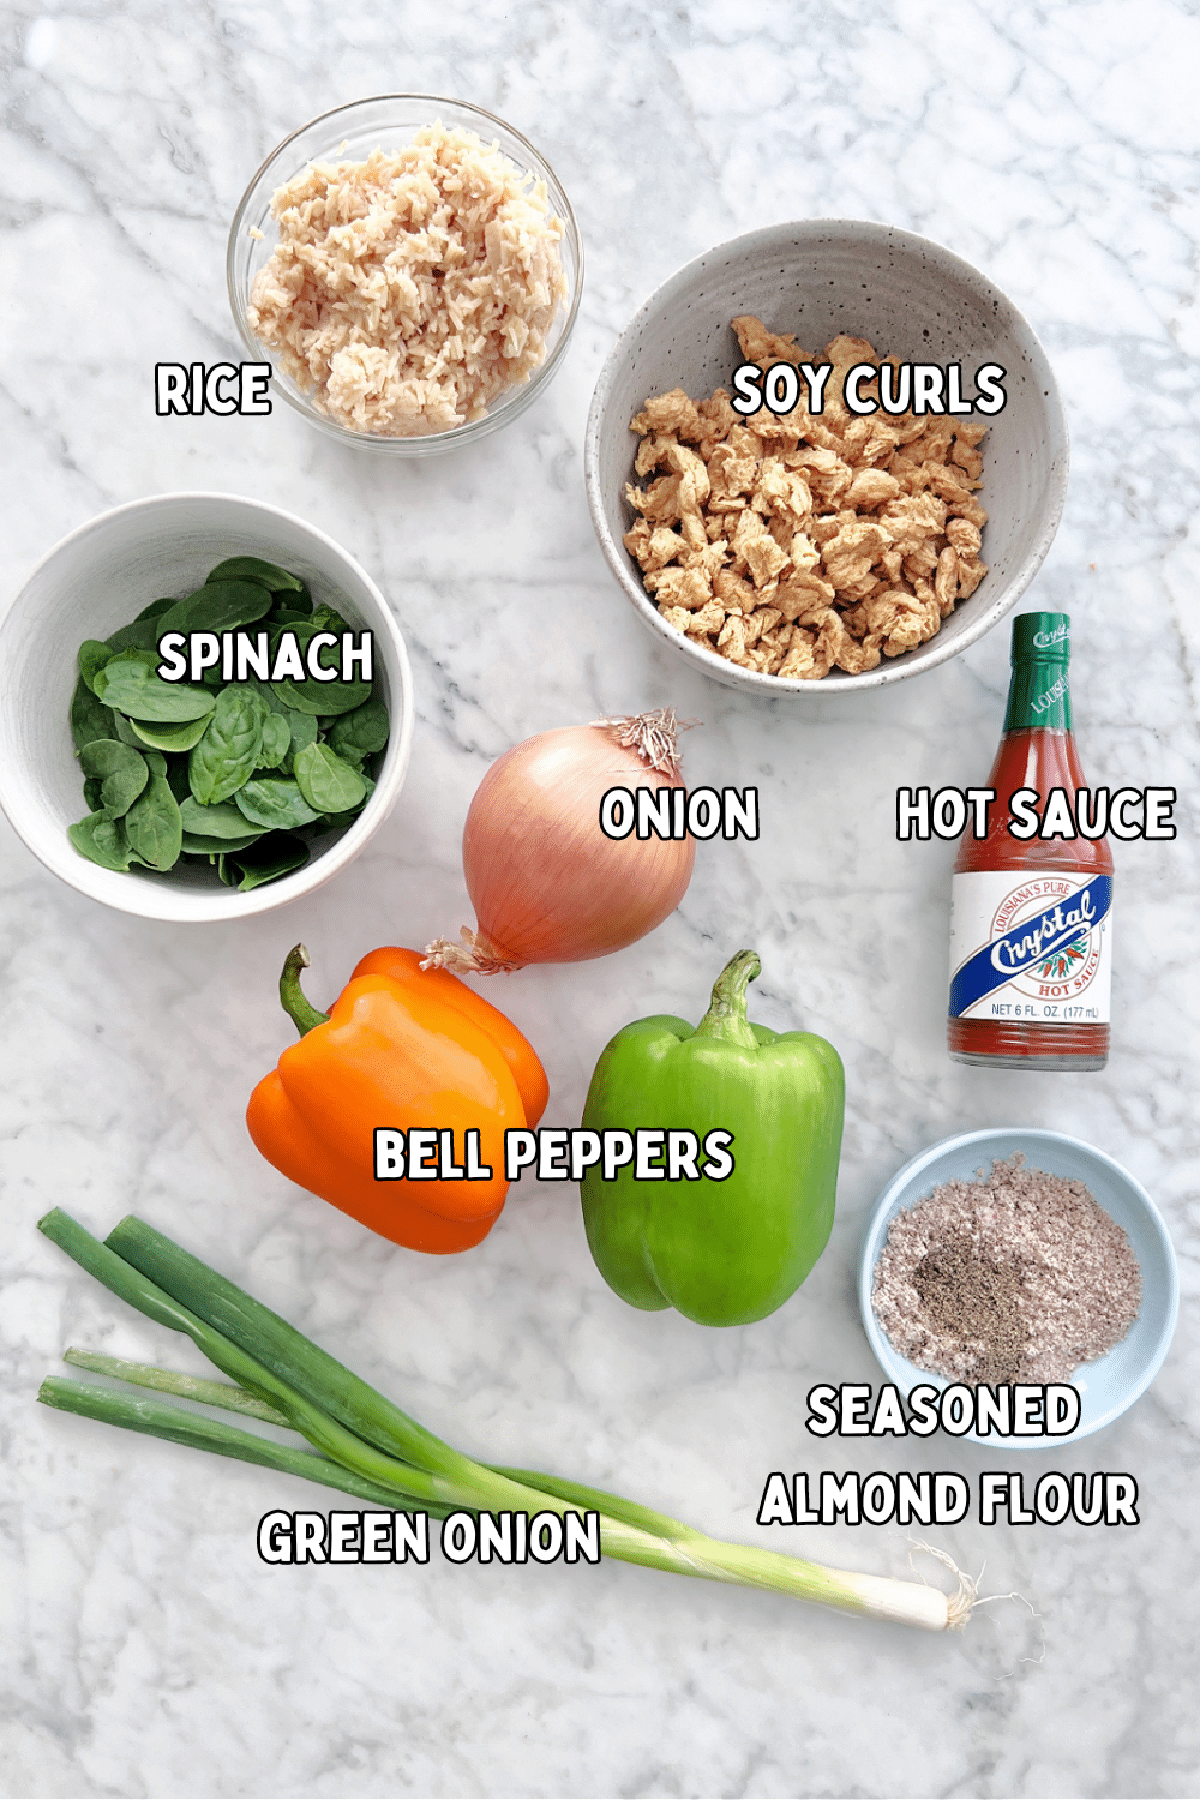 Bowls of ingredients for vegan buffalo chicken stuffed peppers: rice, soy curls, spinach, onion, hot sauce, bell peppers, green onion, and seasoned almond flour.